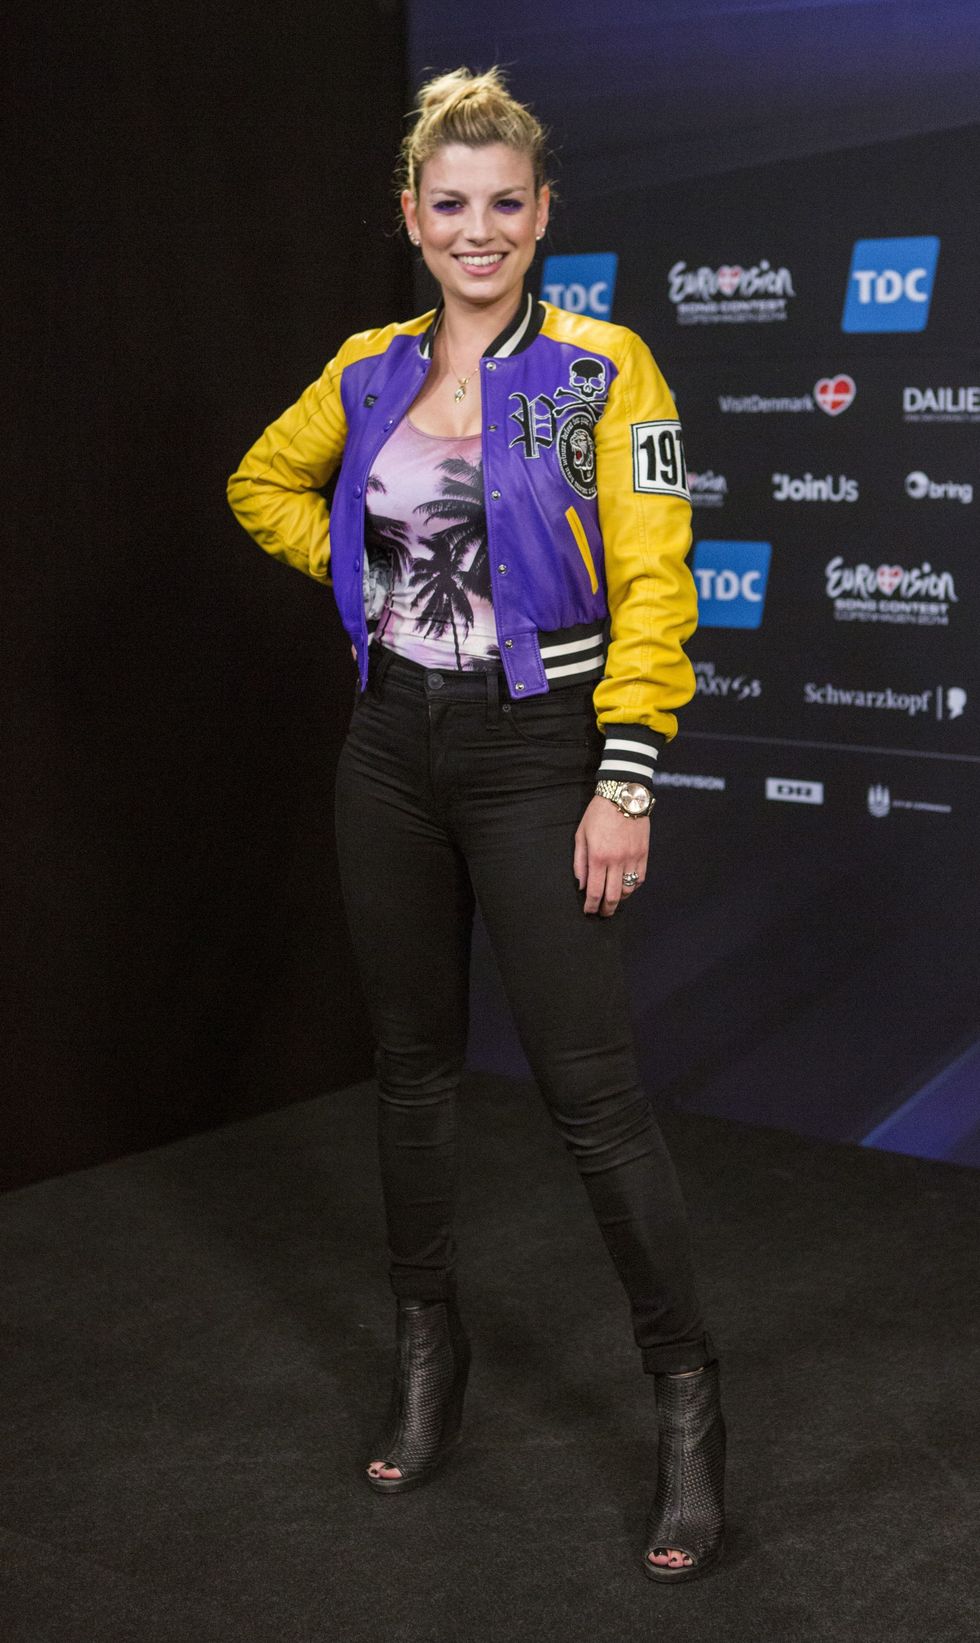 Emma Marrone representing Italy at the Eurovision Song Contest with her song "La mia citta" poses during a Meet and Greet on May 4, 2014 in Copenhagen, about a week before the contest. The final of the competition will be held in the Danish capital on May 10, 2014.      AFP PHOTO / NIKOLAI LINARES / SCANPIX DENMARK / DENMARK OUT        (Photo credit should read Nikolai Linares/AFP/Getty Images)